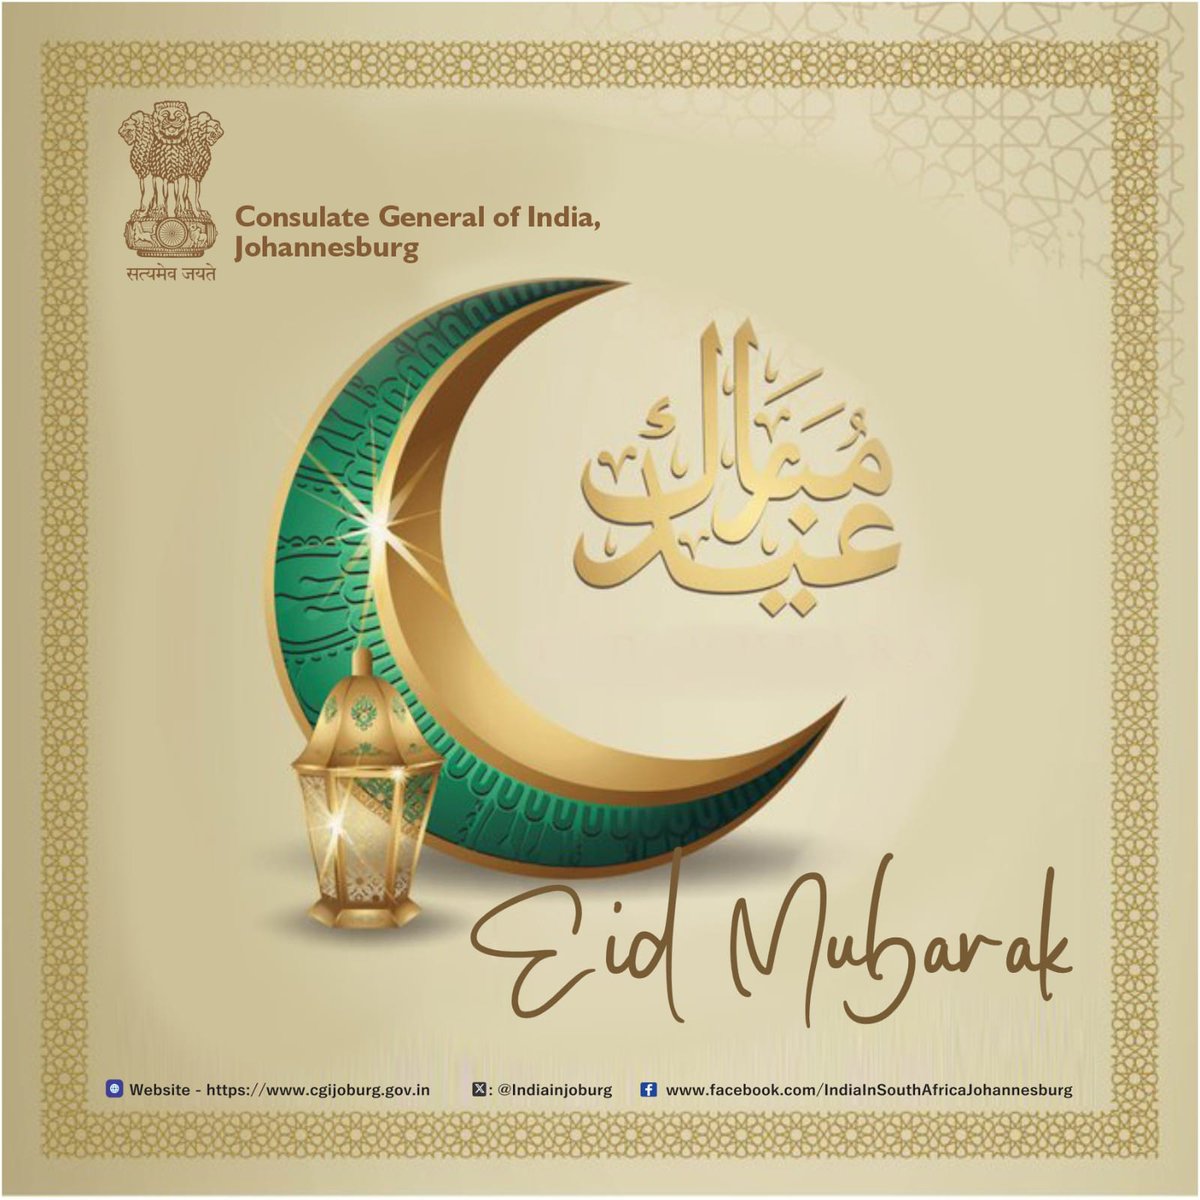 Eid Mubarak to all, from Consulate General of India Johannesburg!